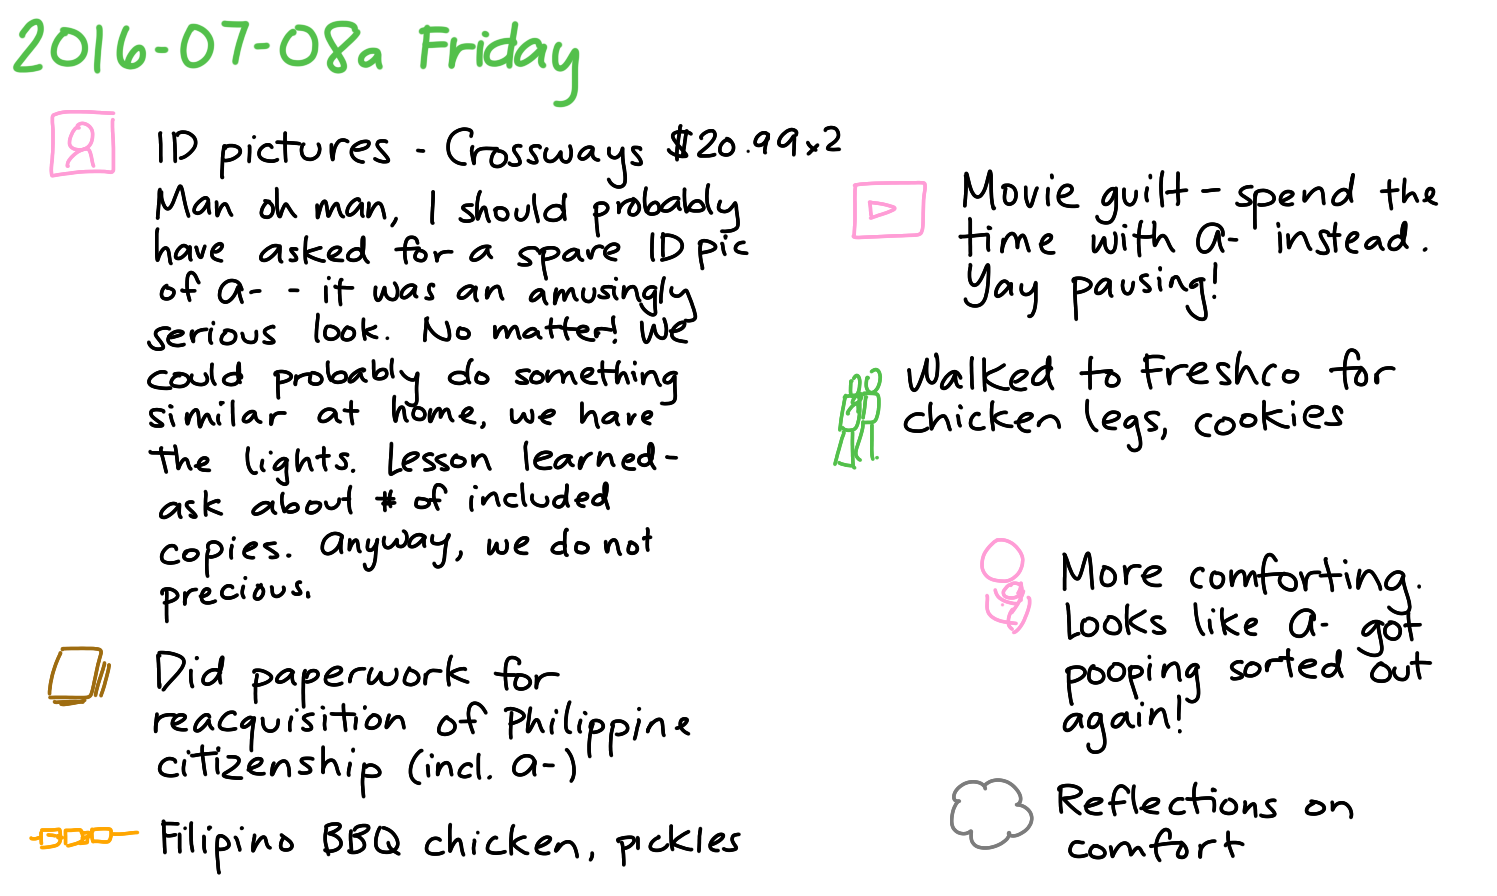 2016-07-08a Friday -- index card #journal.png